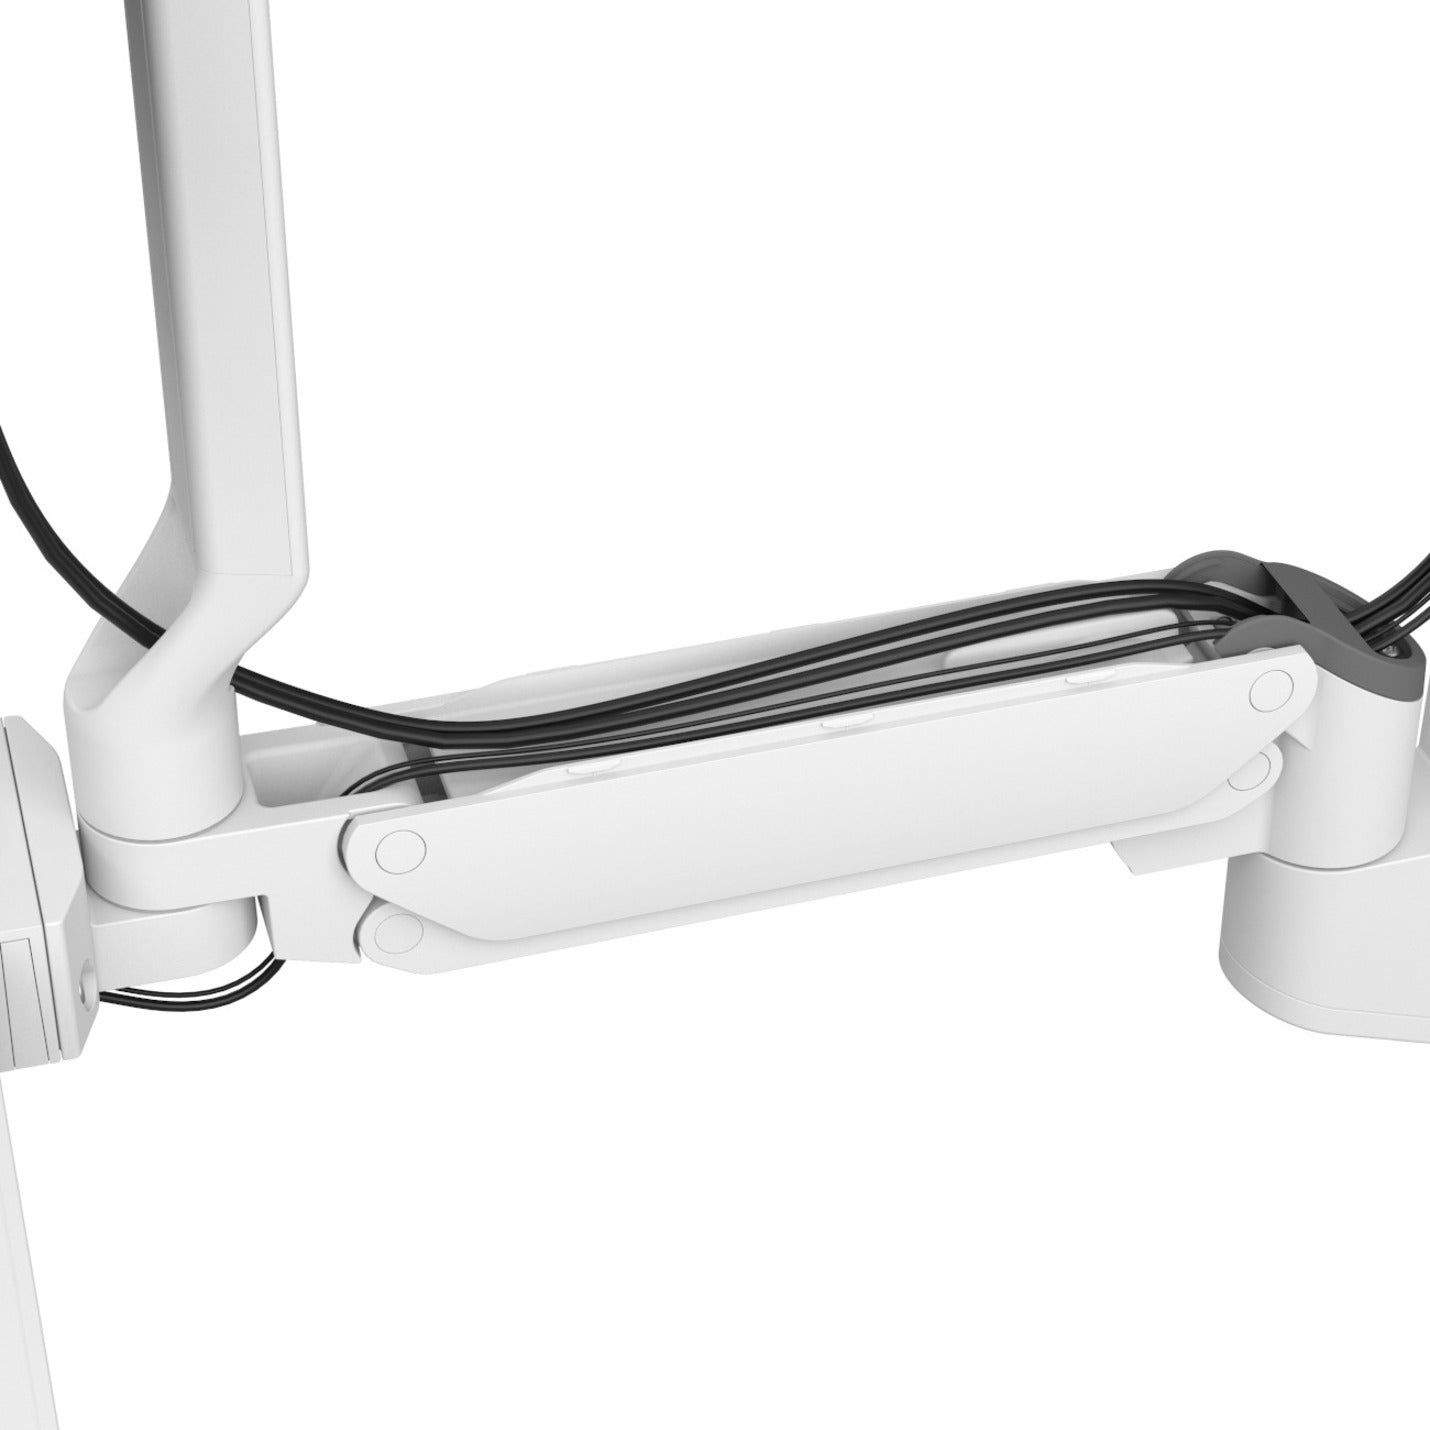 Ergotron 45-619-251 CareFit Mounting Arm for Monitor, Mouse, Keyboard, LCD Display, Mount Extension - White